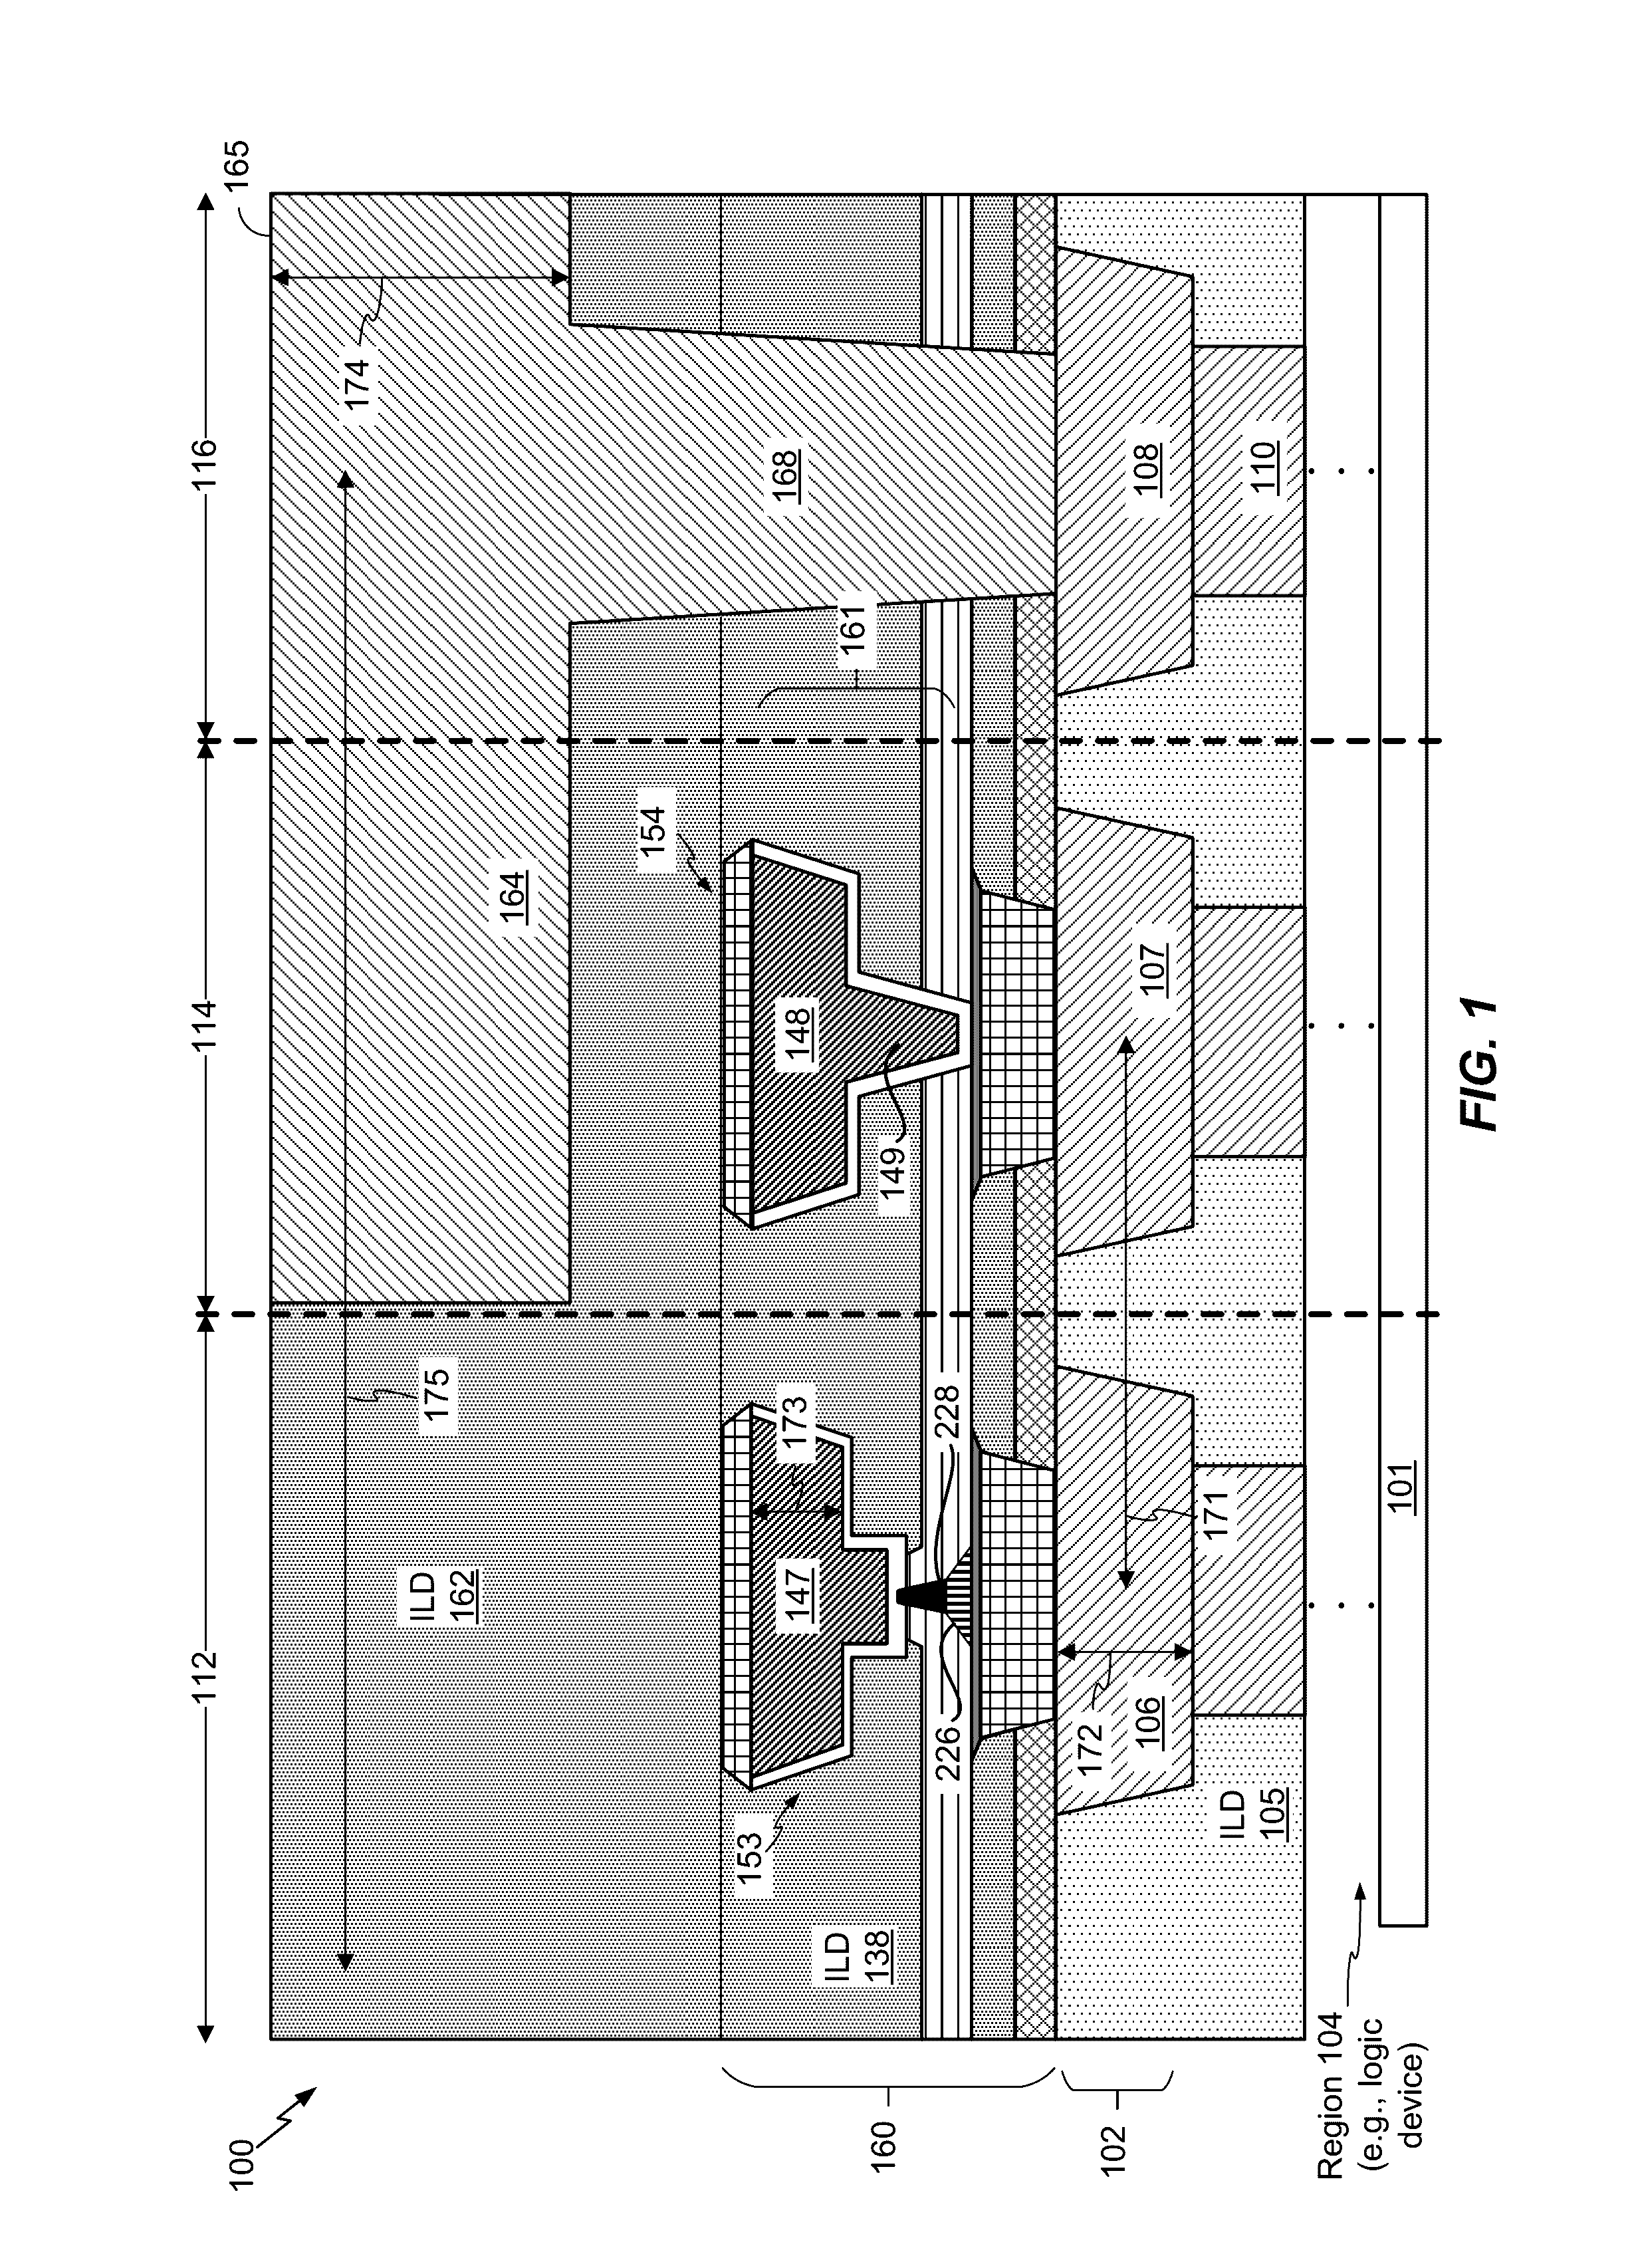 Metallization process for a memory device